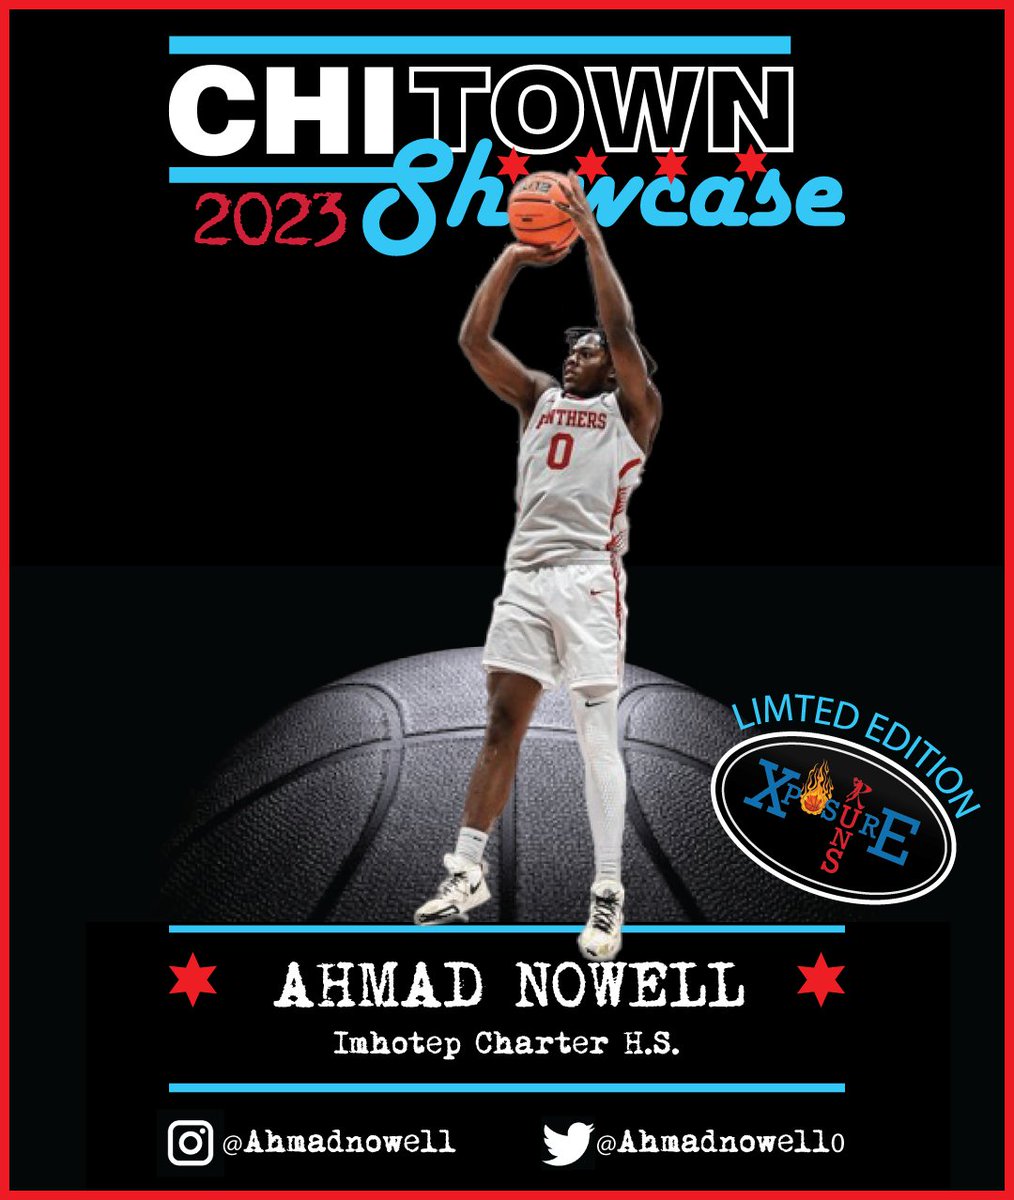 I said I was inviting a player from out of town, so I'm starting with my own hometown 😳😬 & inviting the 4 ⭐ number 1️⃣ player from Philadelphia🏙️. When you shoot..aim high!!🫱🏾‍🫲🏽💪🏽 Please welcome Team Finals guard & UConn commit @AhmadNowell0 to the @chitownshowcase